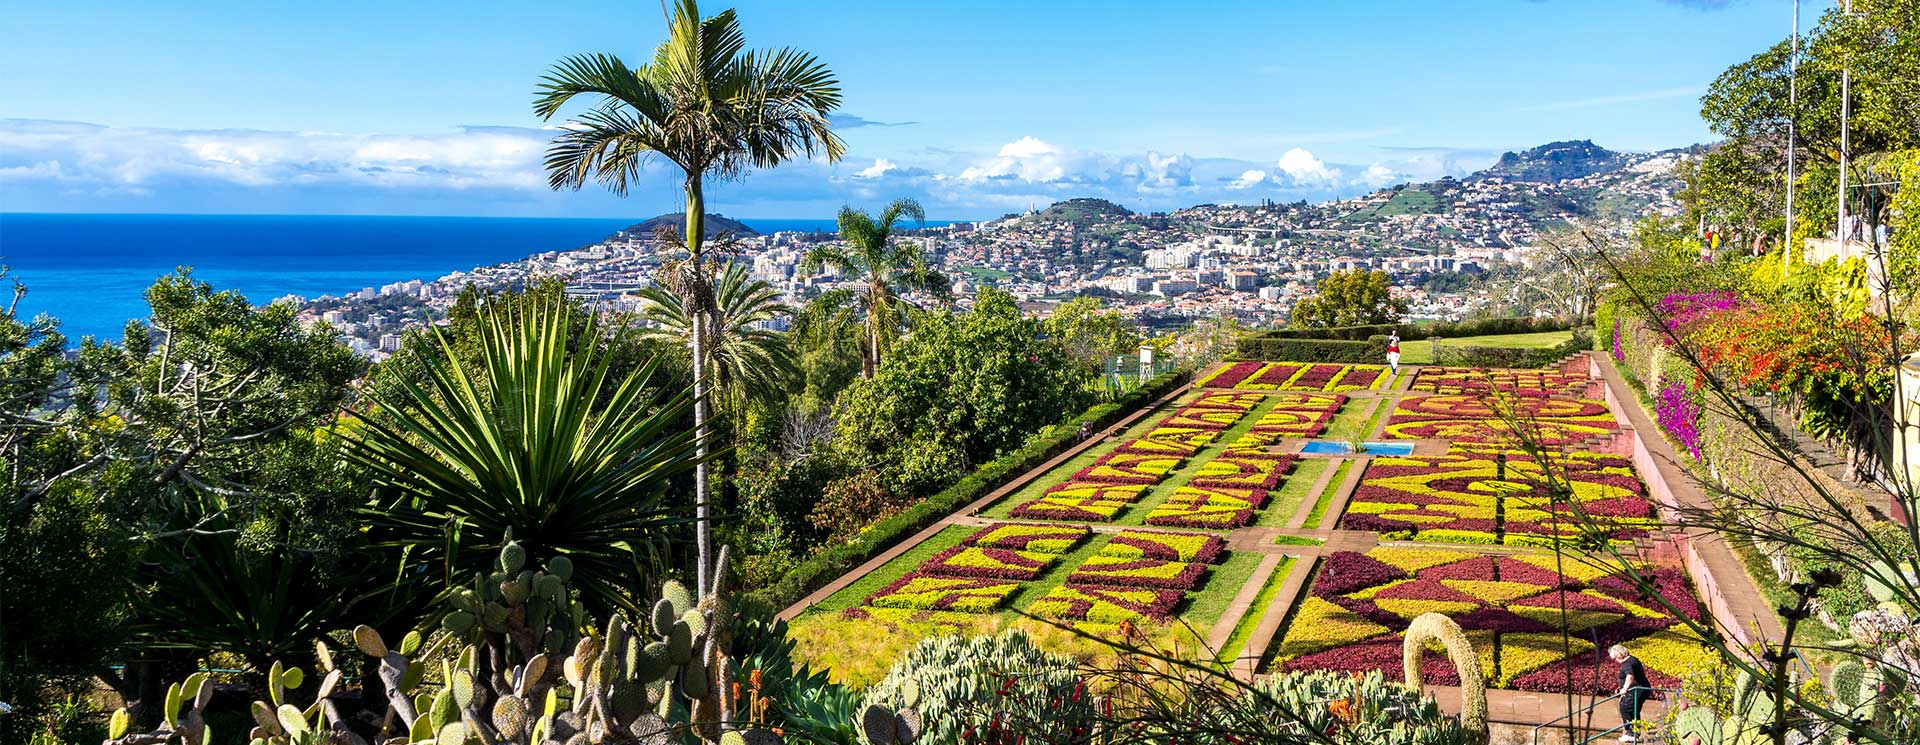 Gardens in Funchal, Portugal